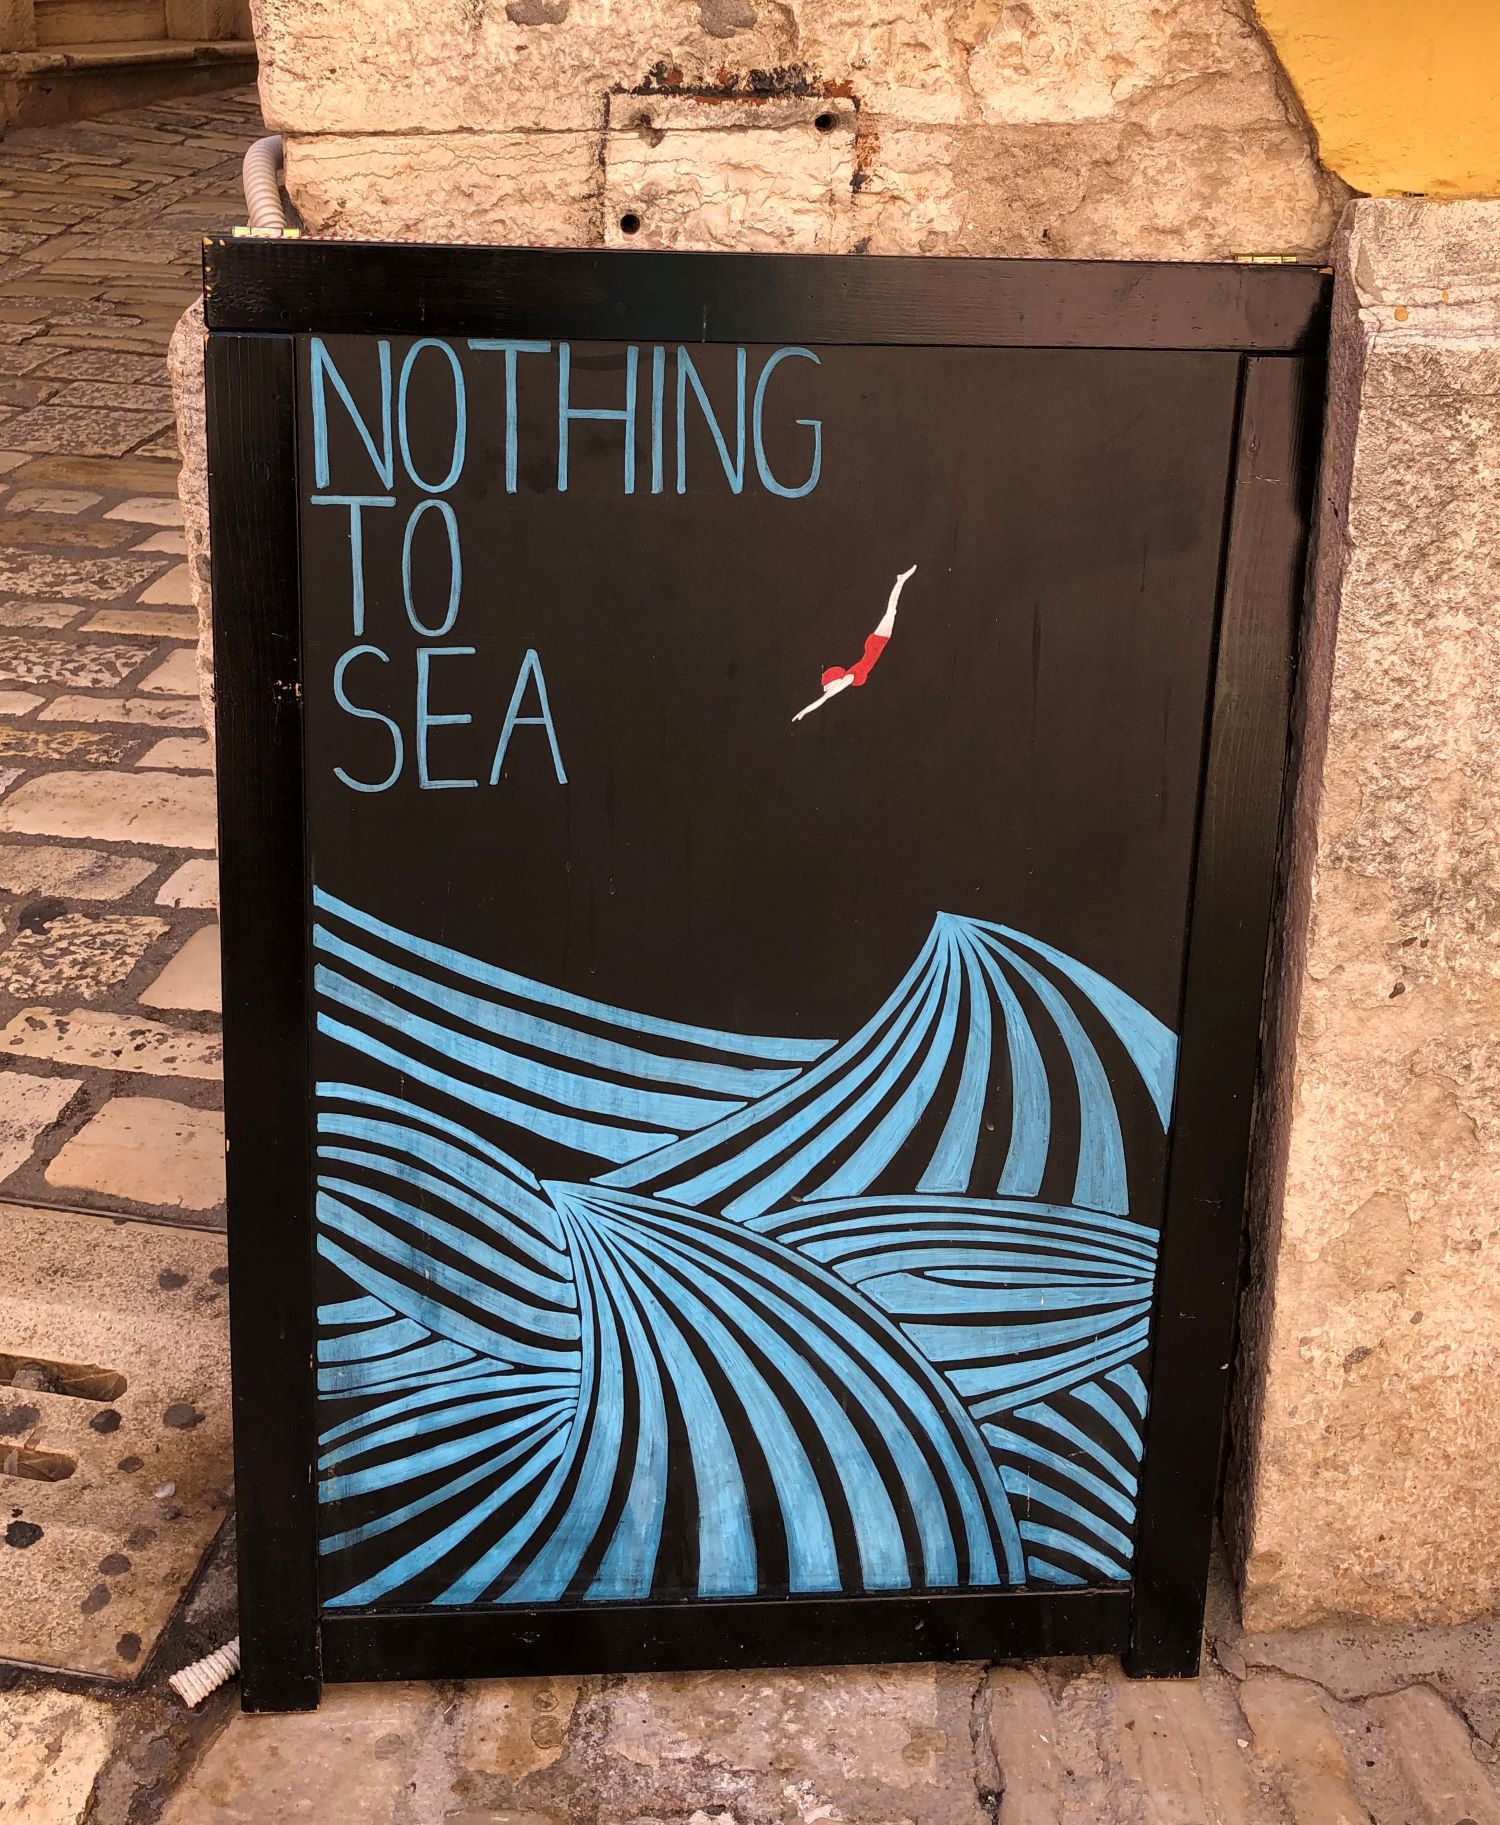 Kunstgalerie "Nothing to sea" 